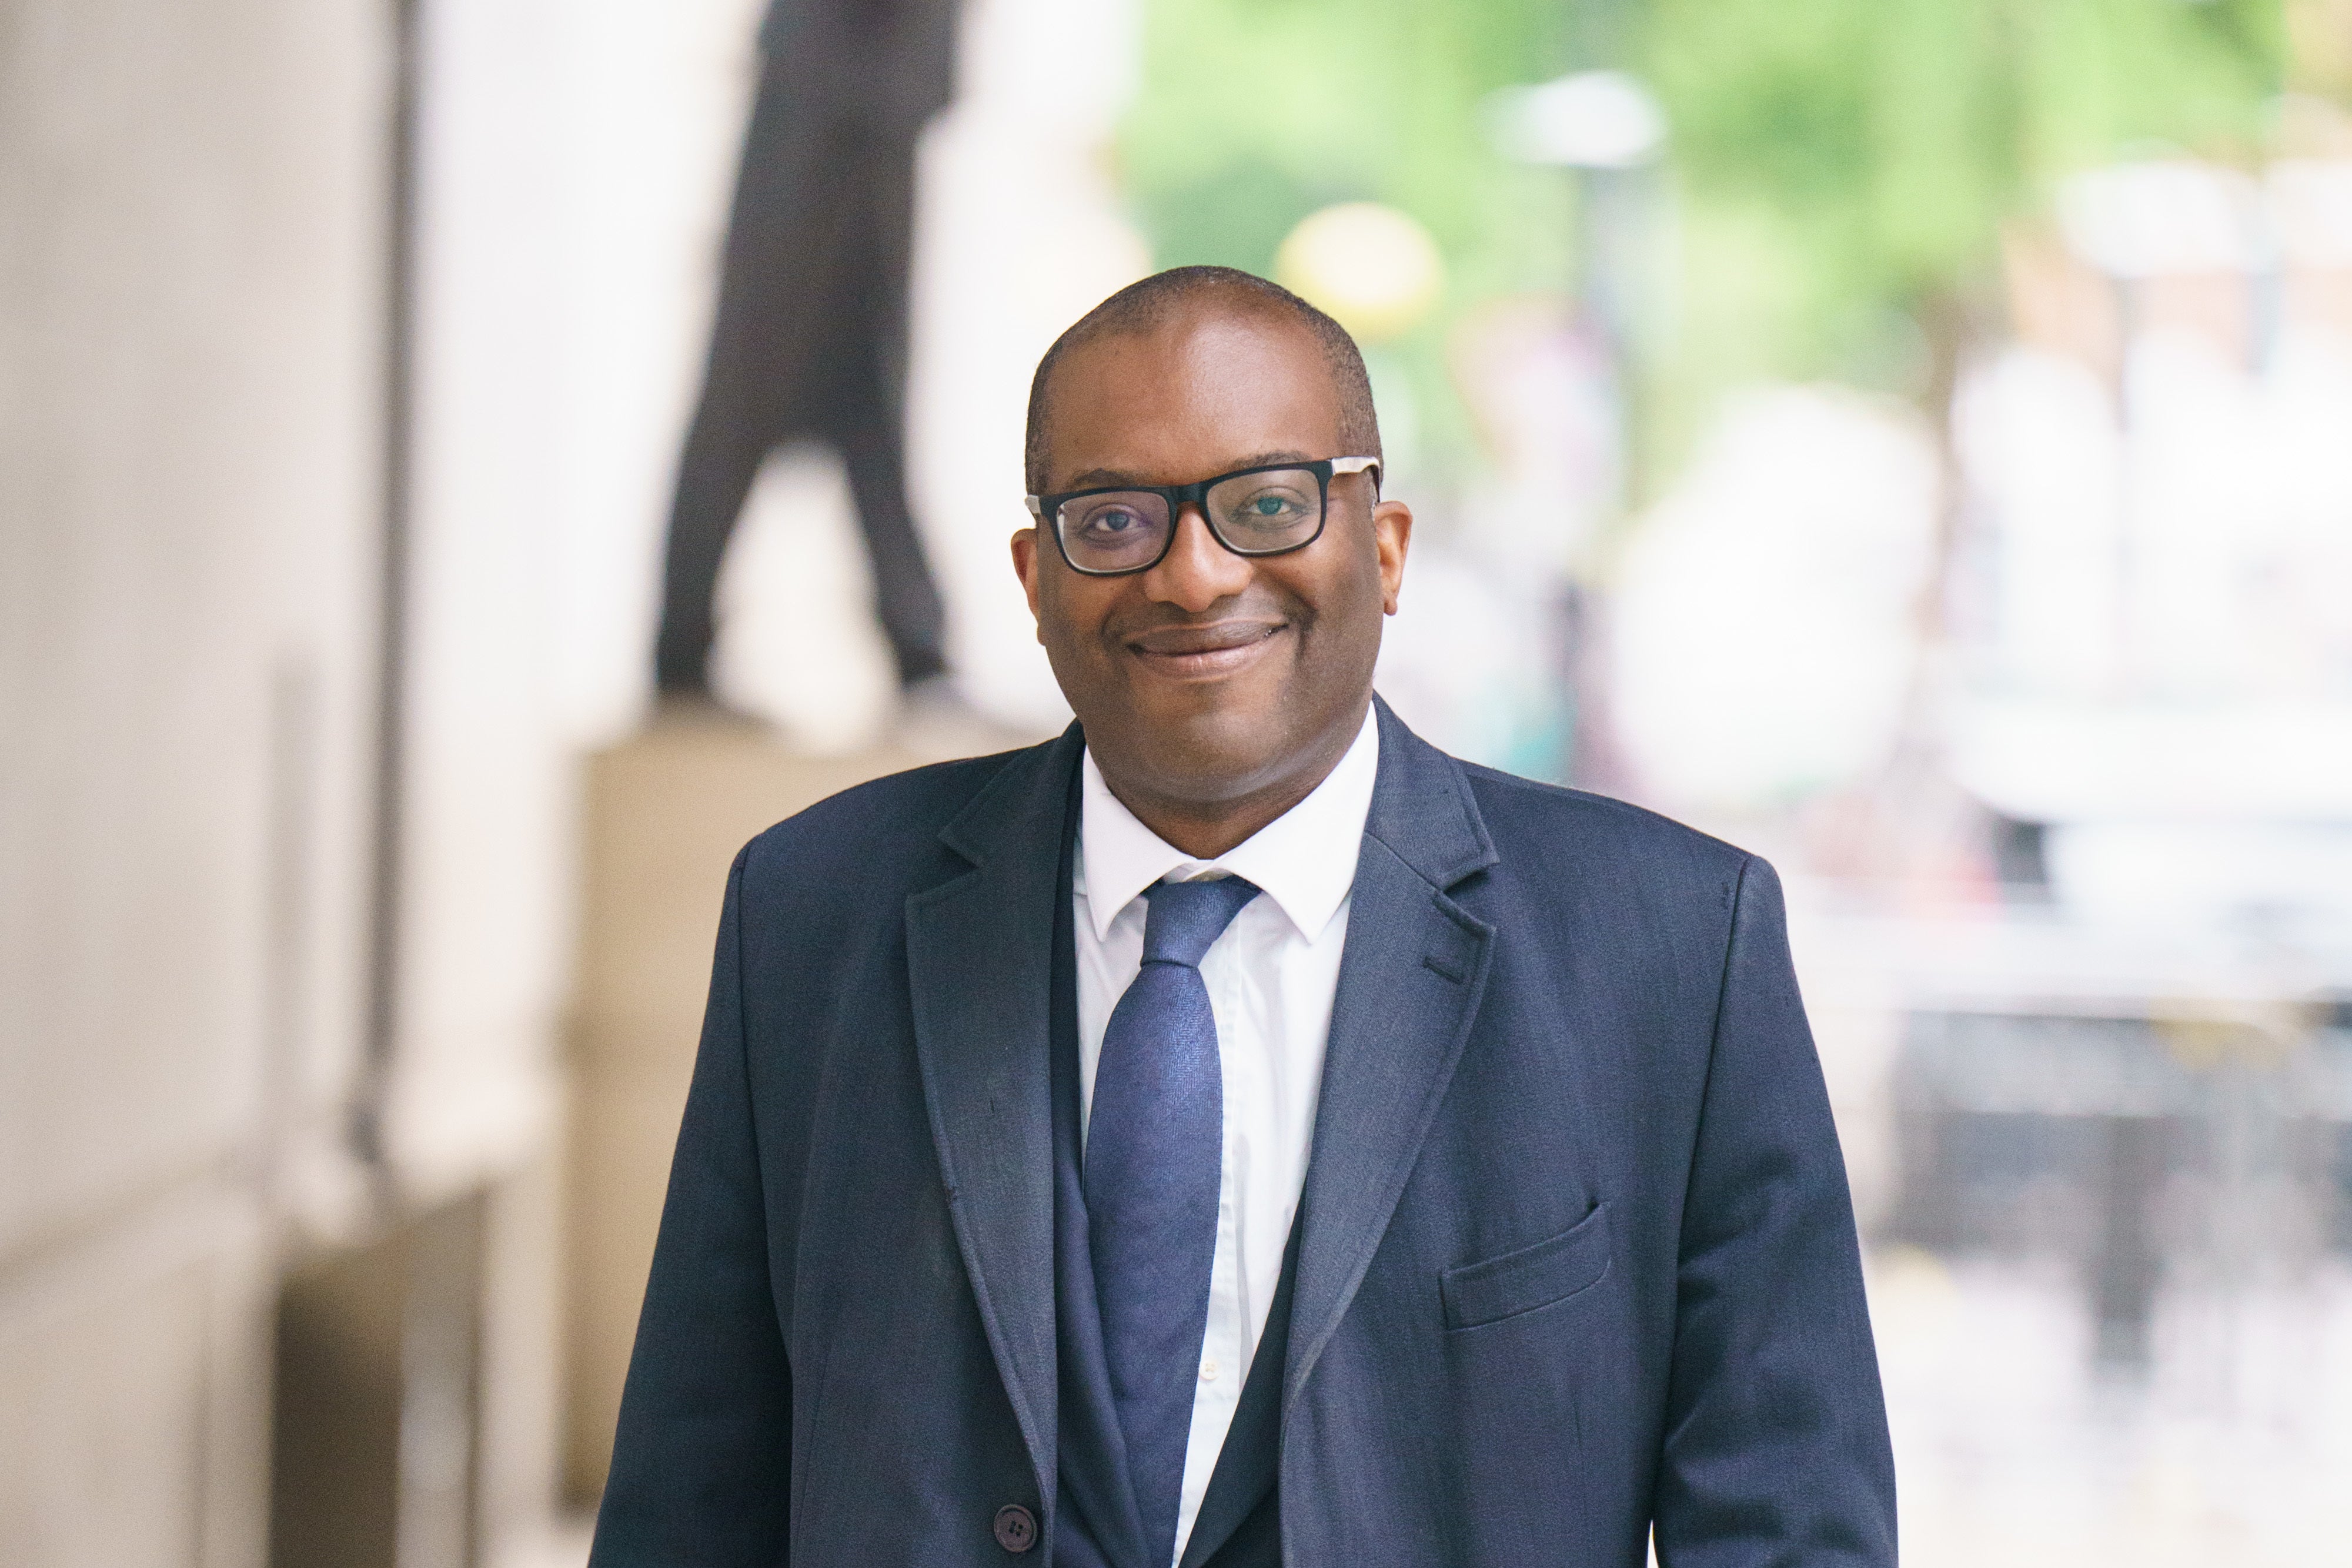 Kwasi Kwarteng is expected to be appointed chancellor